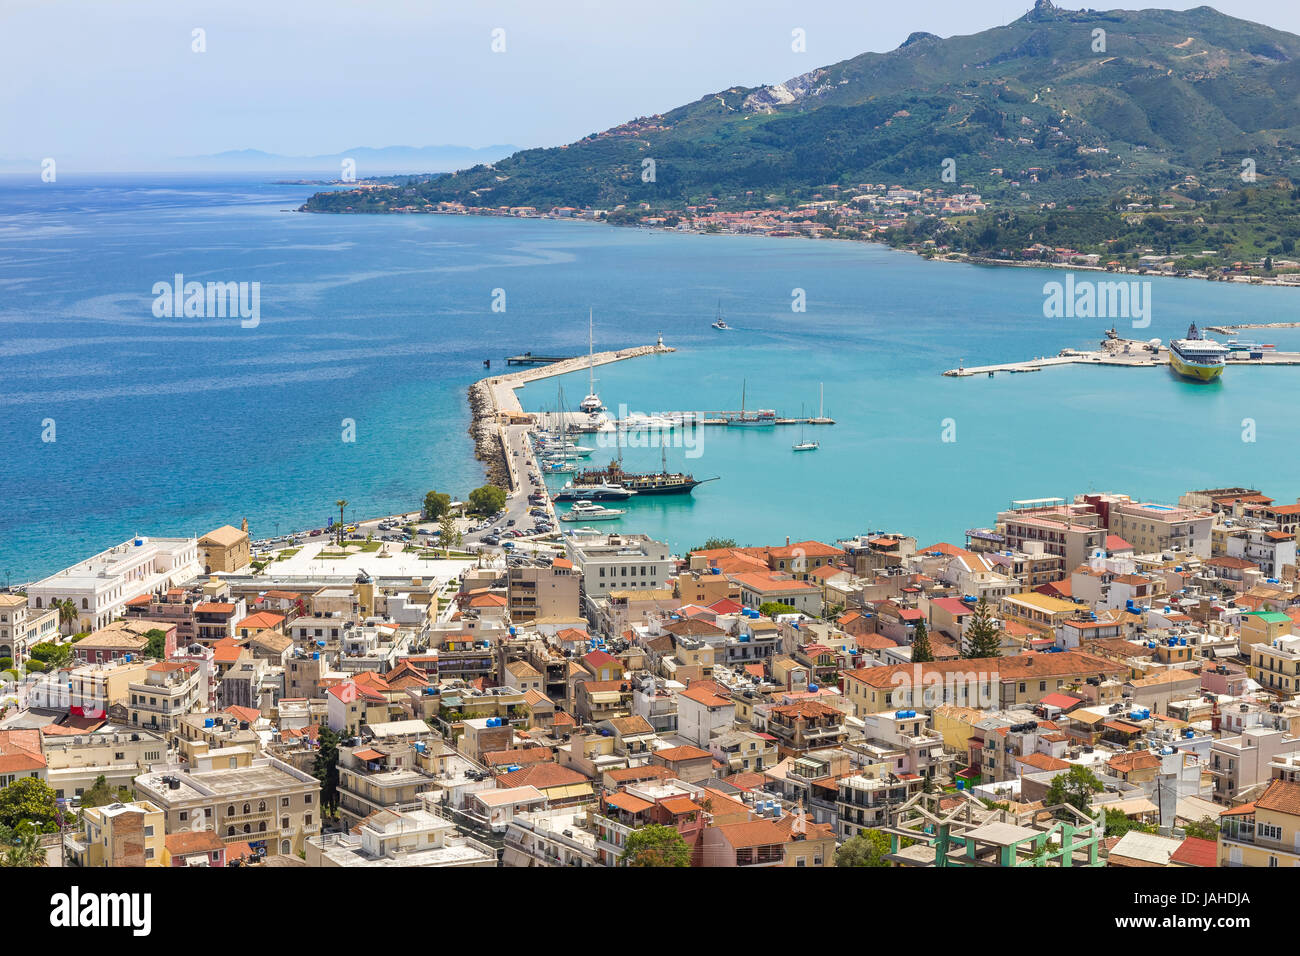 view of the city and harbor Zakynthos, Greece Stock Photo